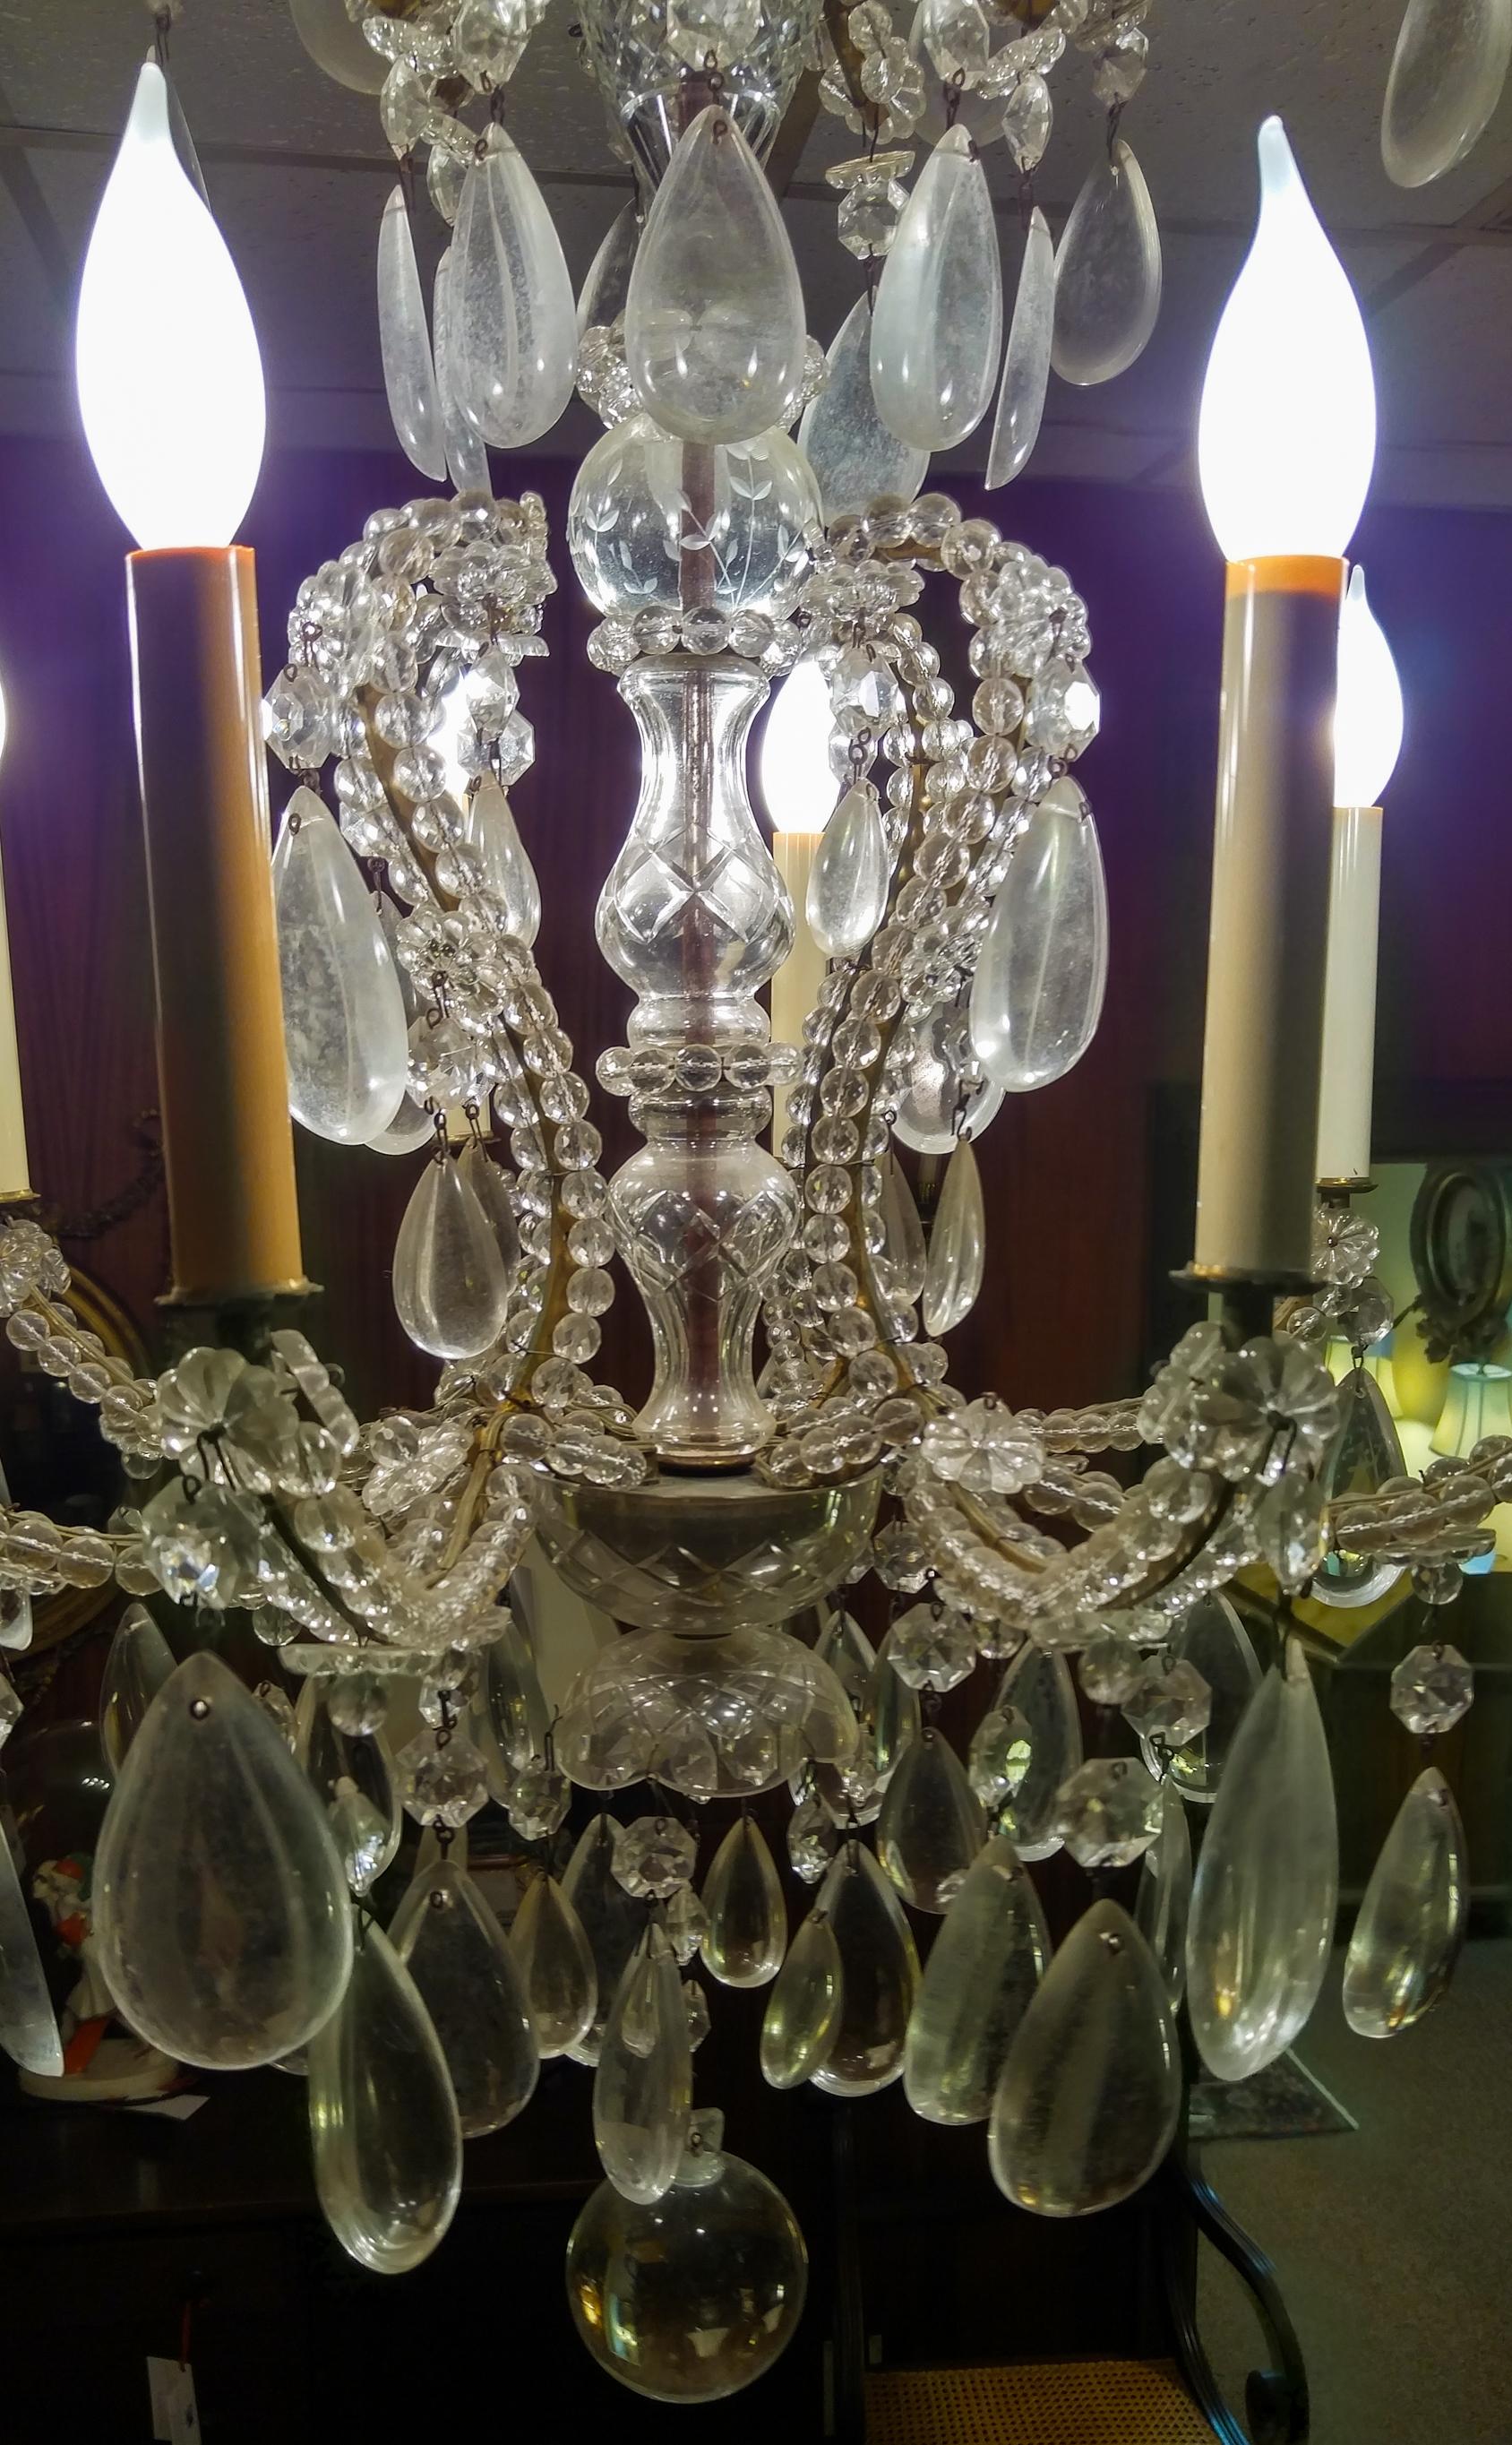 Ornate French crystal chandelier featuring an elaborate center vase column, very large teardrop prisms (3.25 inches tall), fancy rosettes and a round crystal pendant. The eight arms are flanked by glass beaded chains. Gorgeous shower effect at